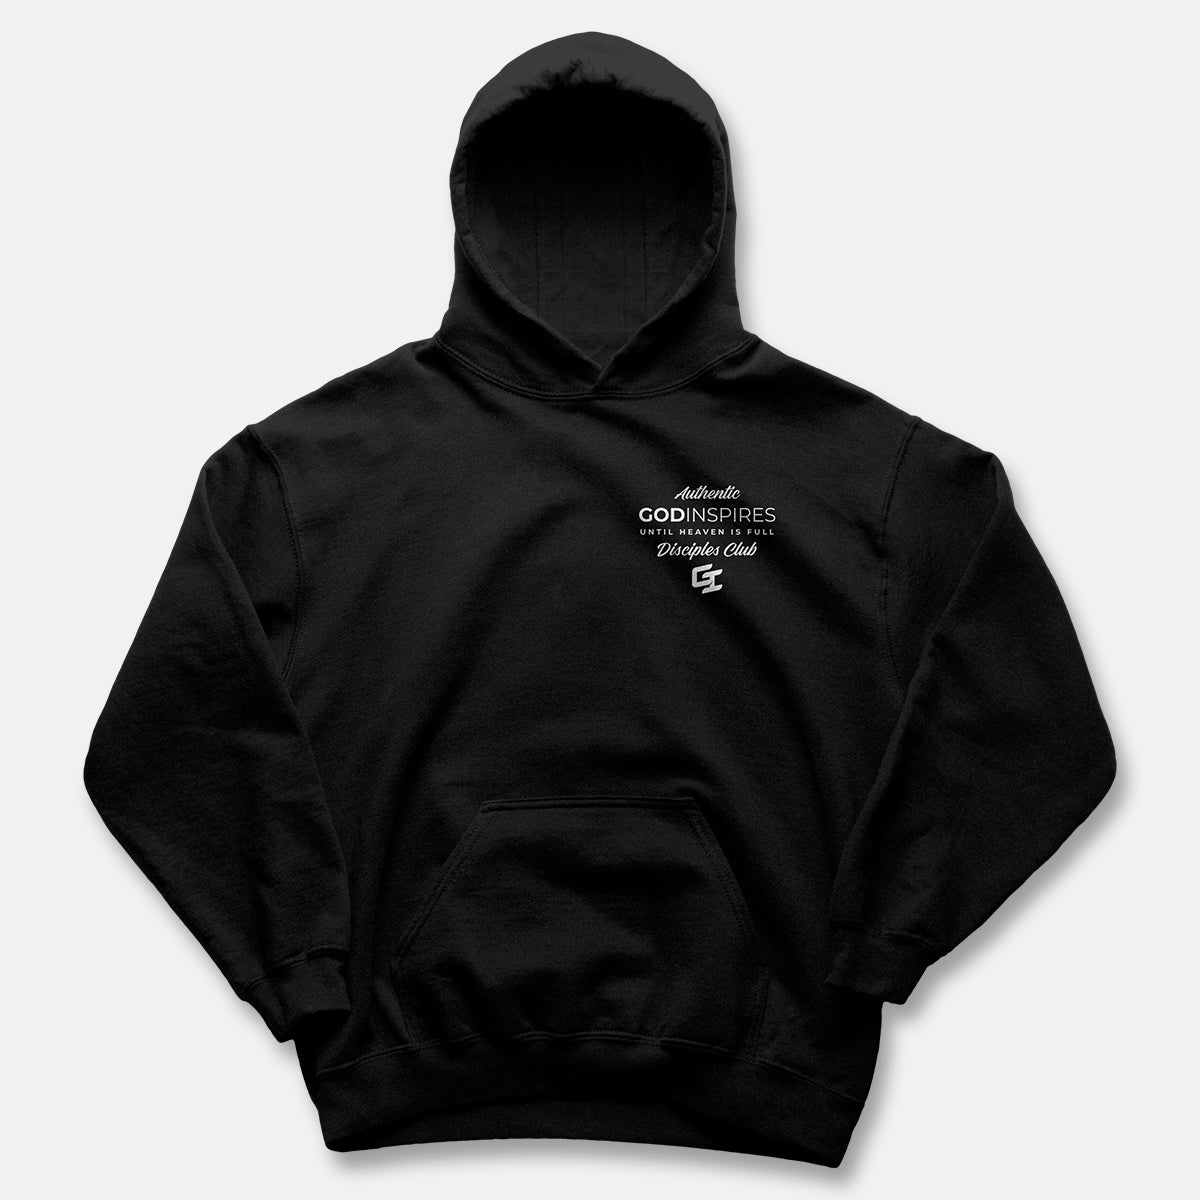 Epiphany 'Rescue' Hoodie